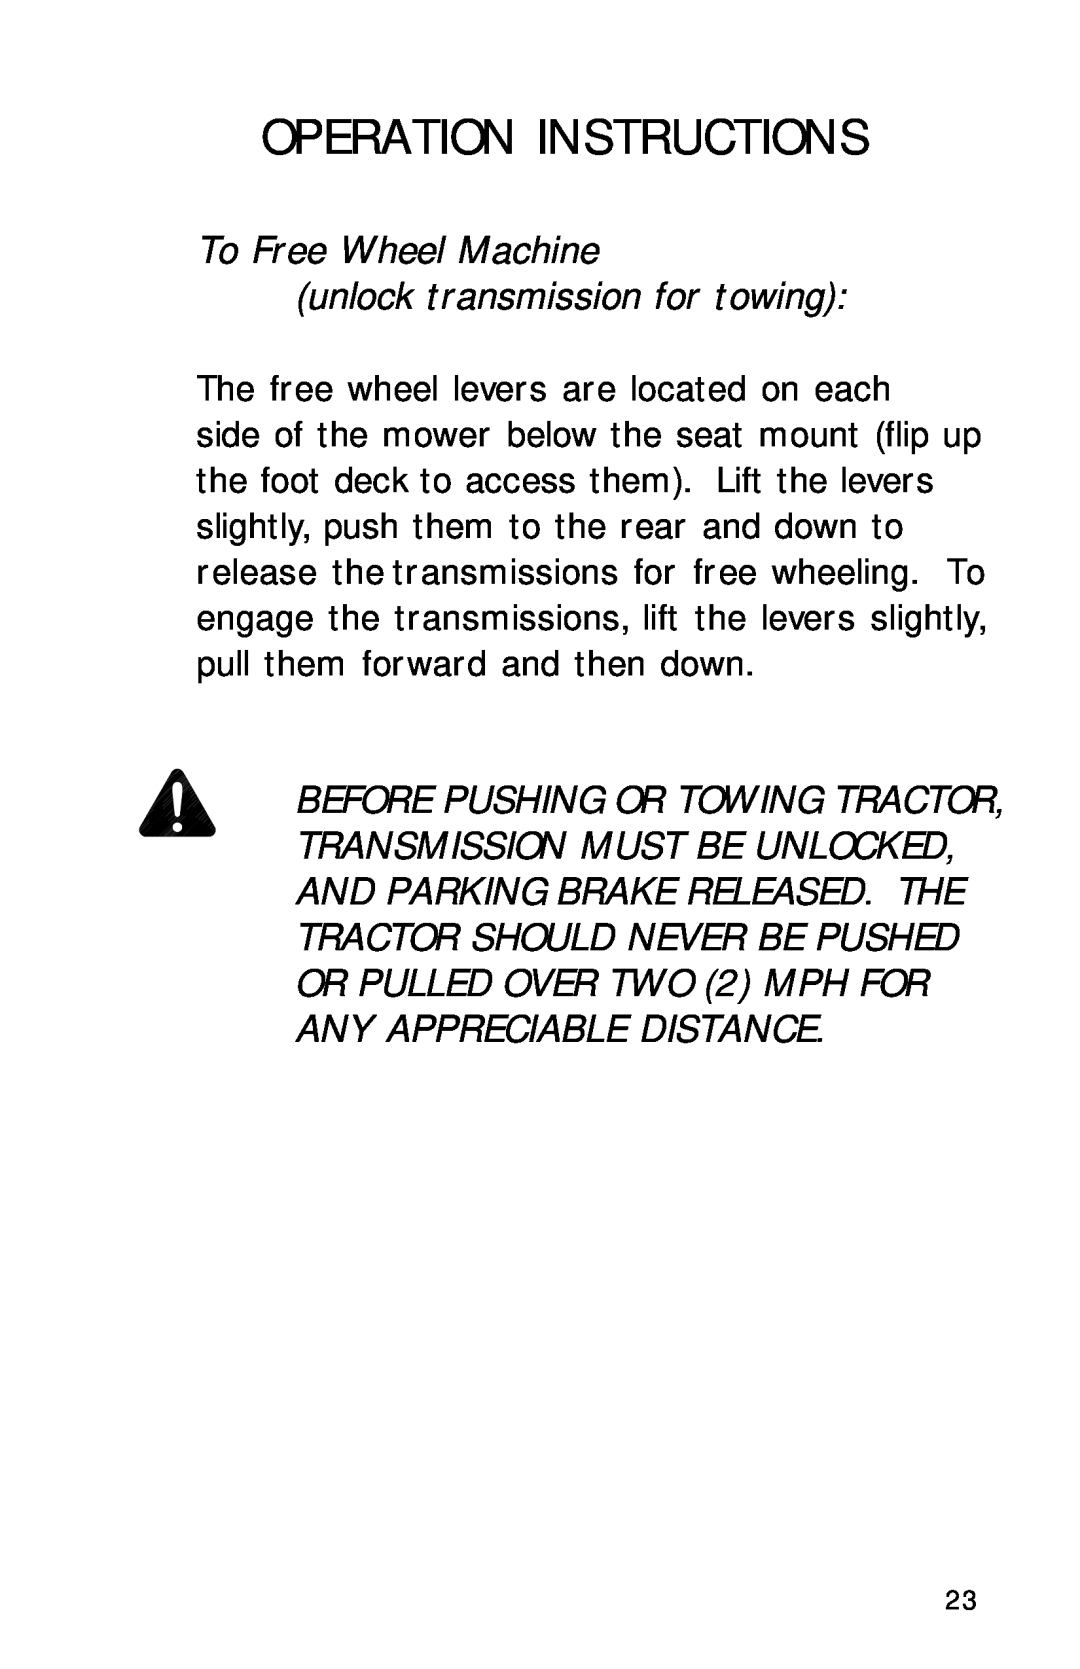 Dixon 13090-0601, ZTR 6023 manual To Free Wheel Machine unlock transmission for towing, Operation Instructions 